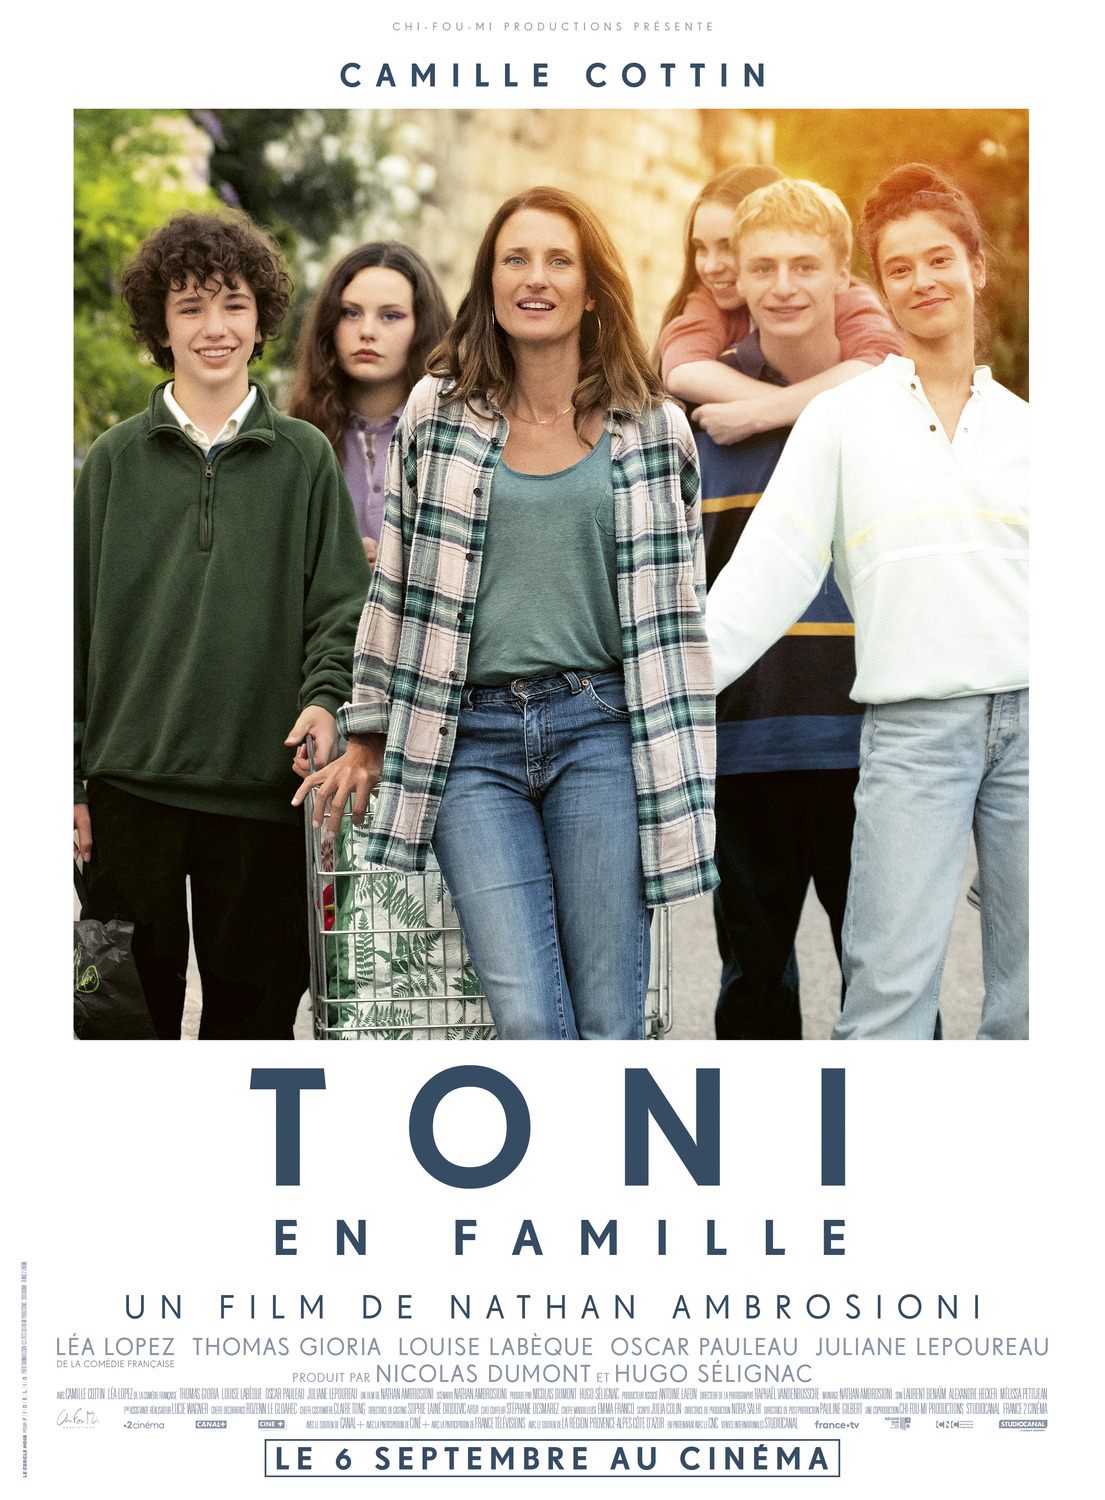 Extra Large Movie Poster Image for Toni, en famille 